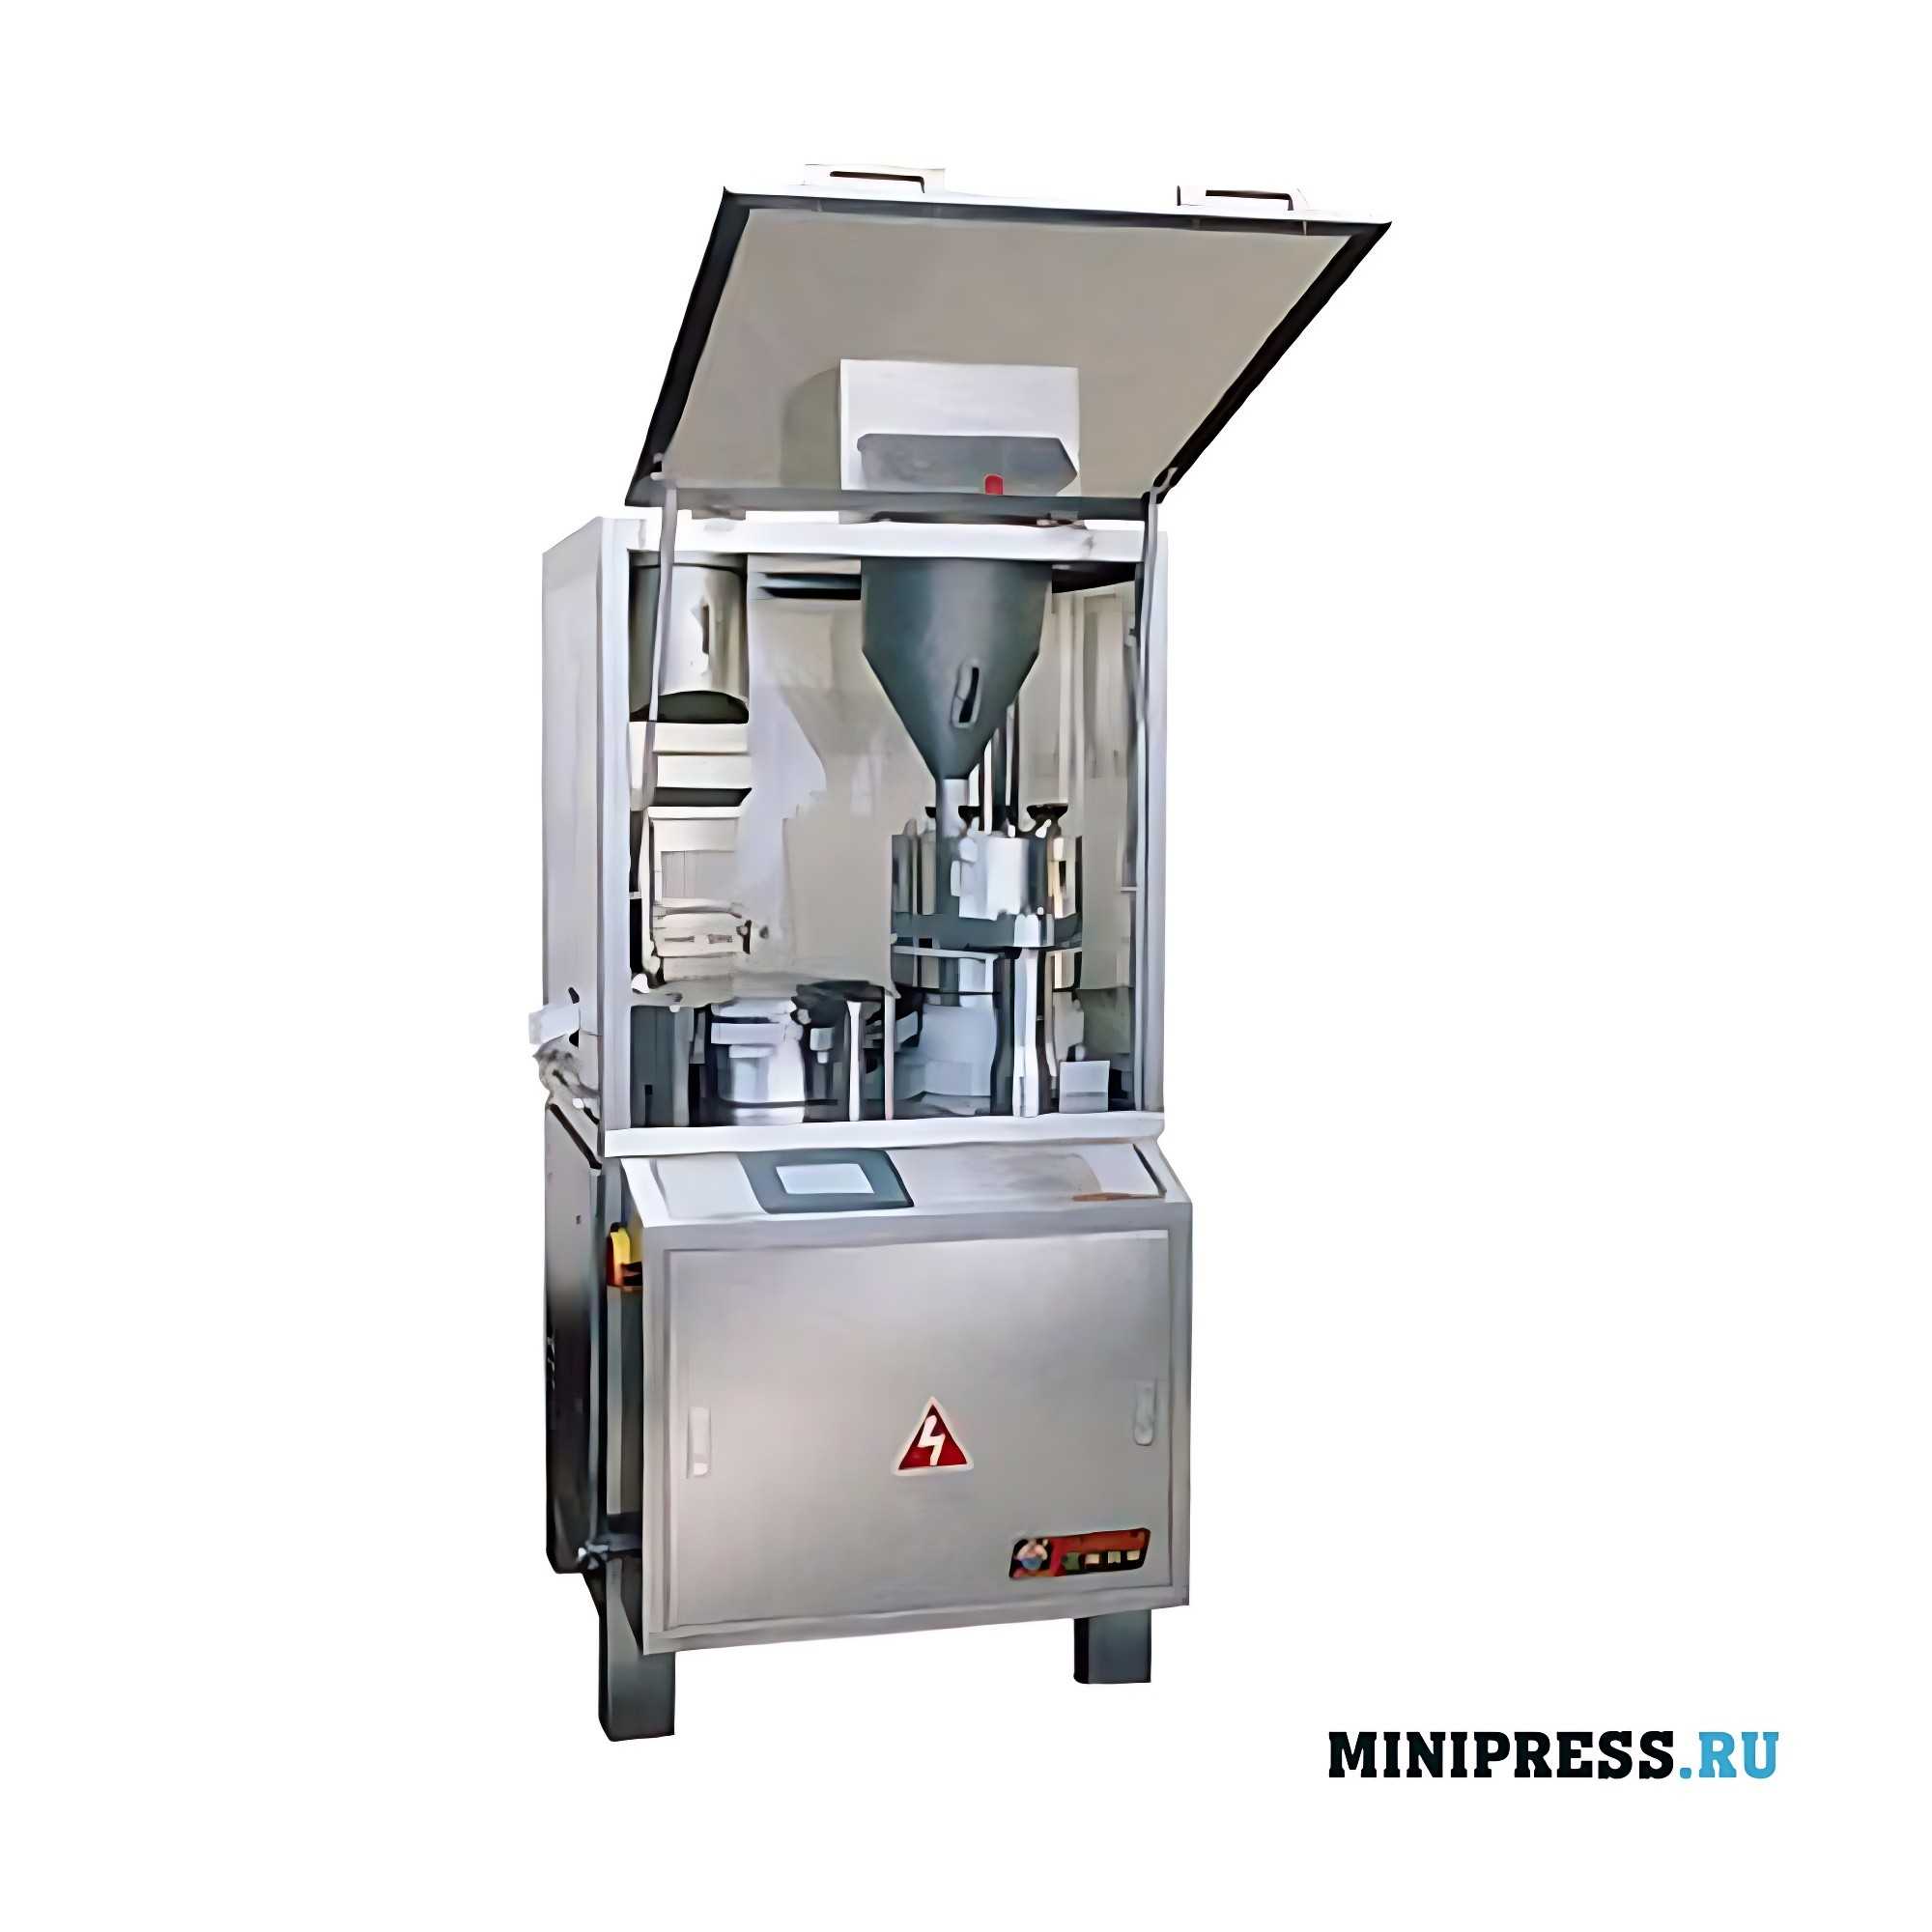 Automatic equipment for filling capsules with SP 20CD powder